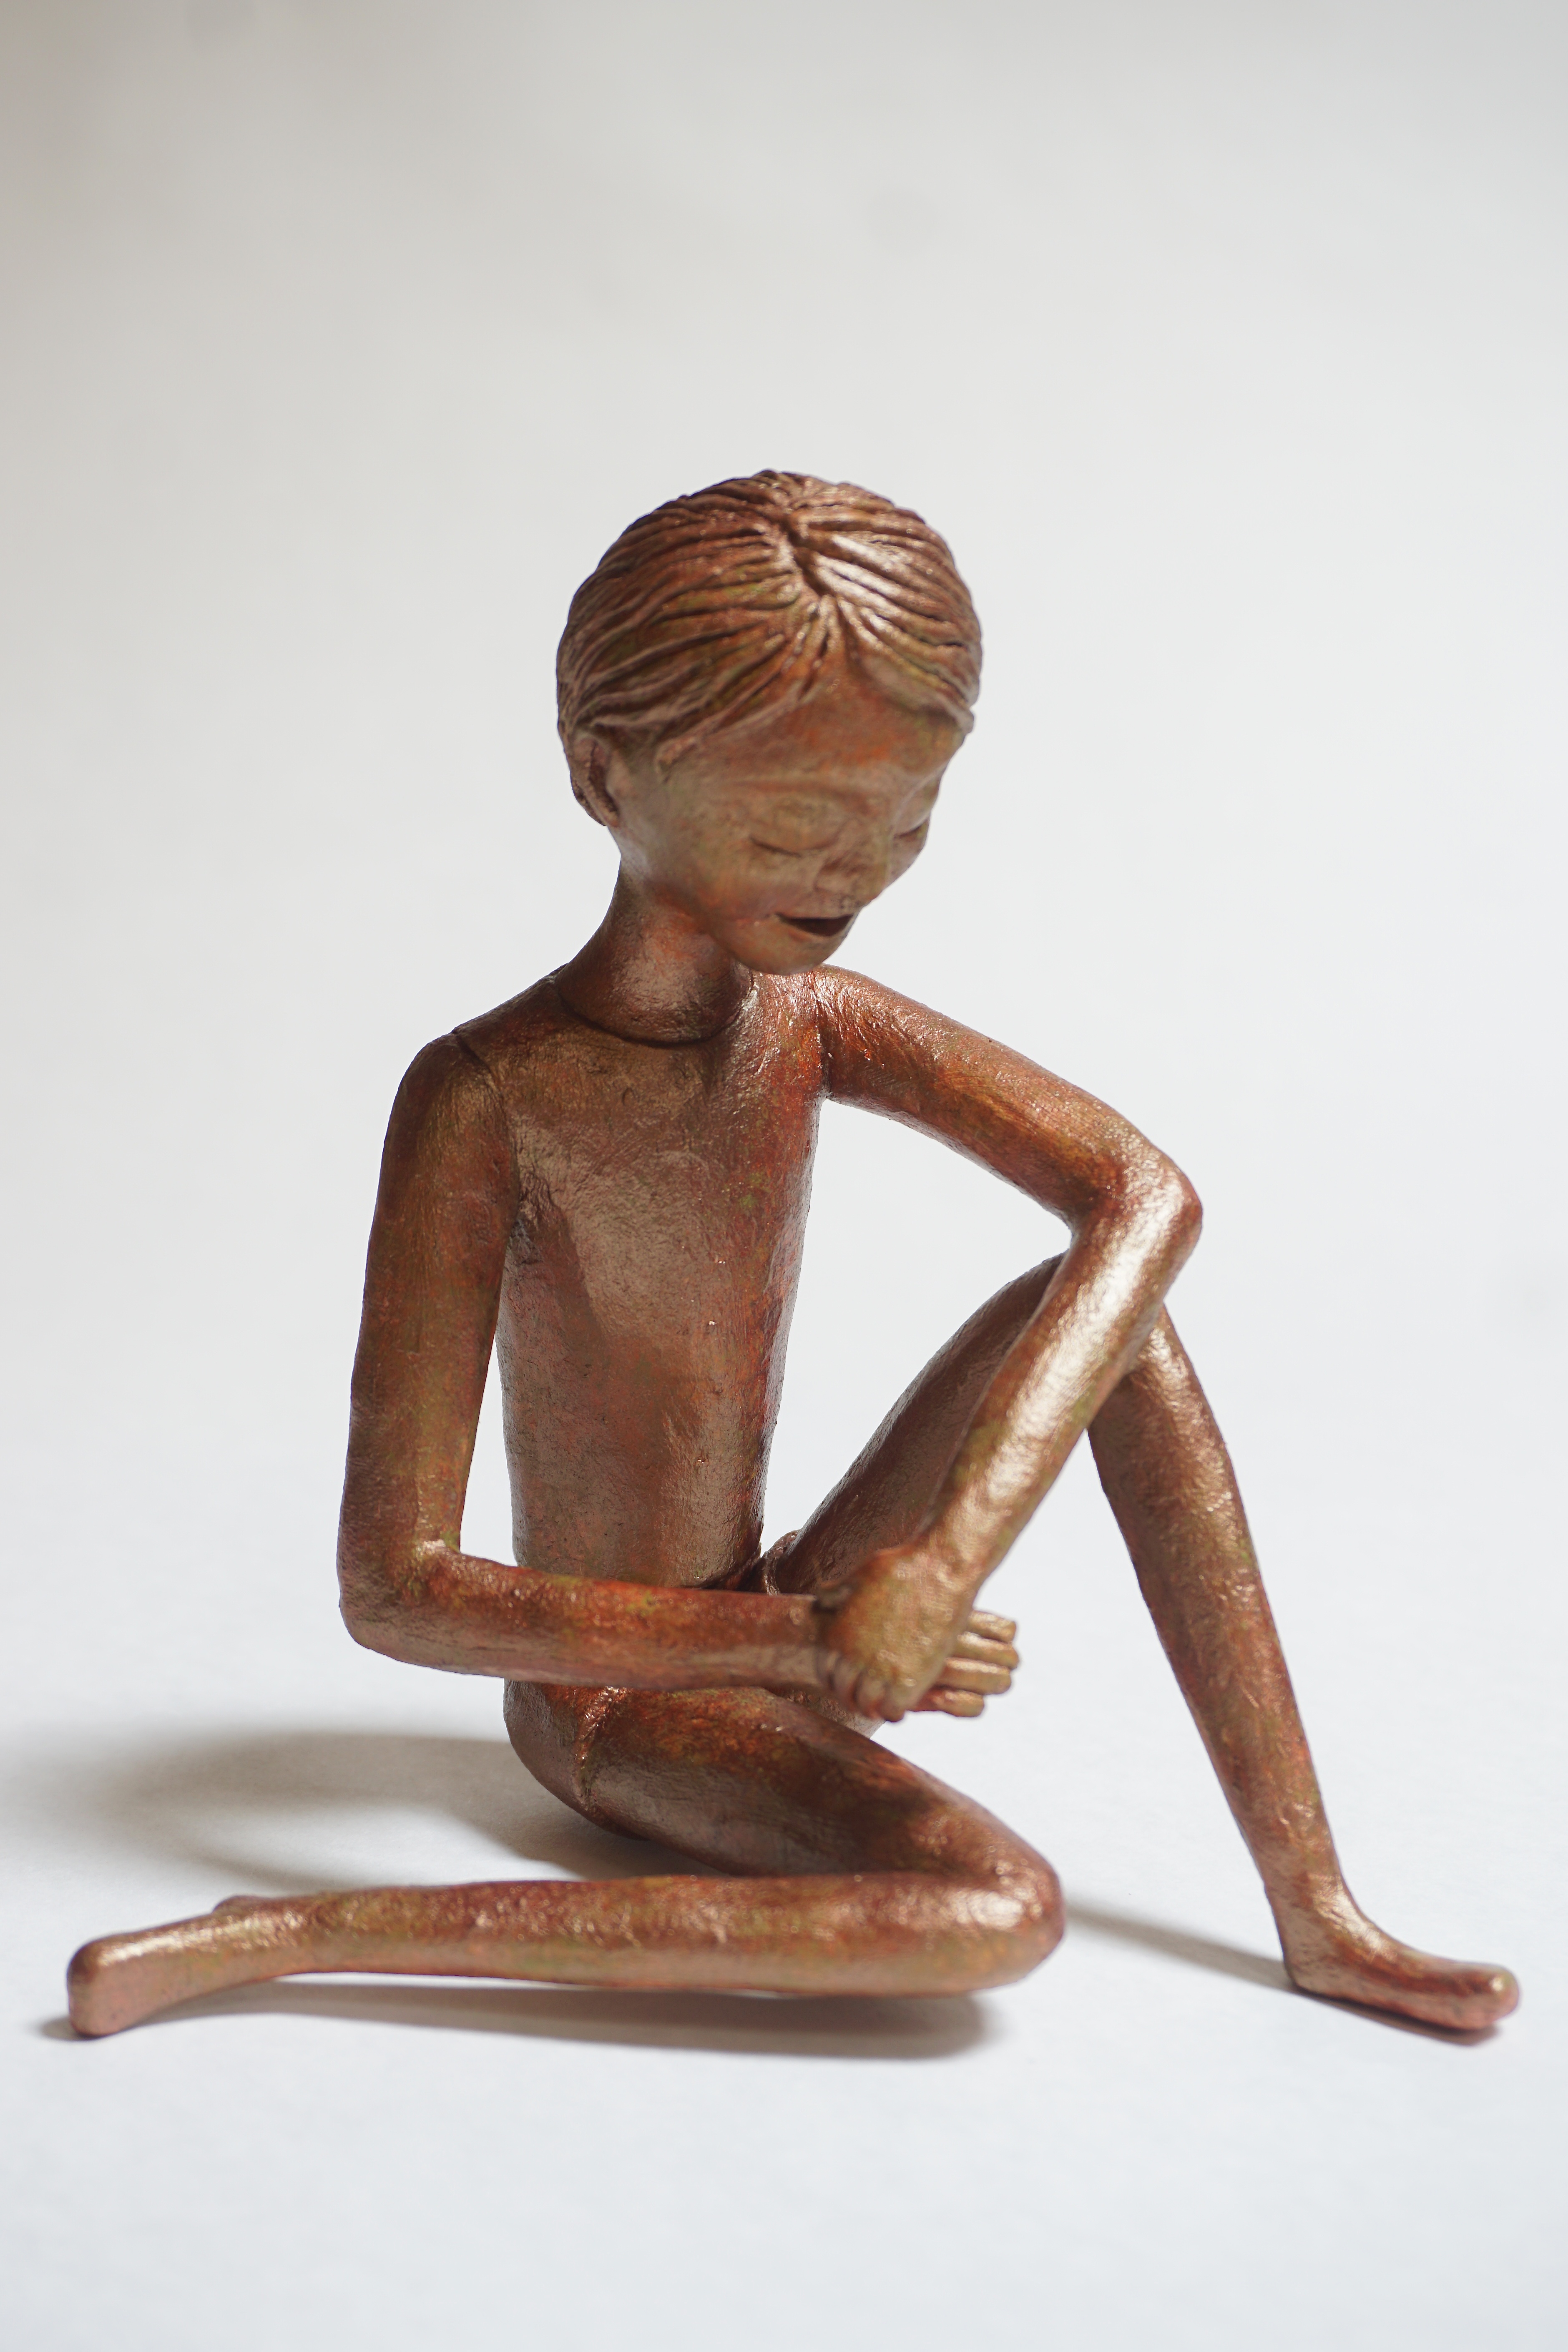 Seated figure with faux bronze finish